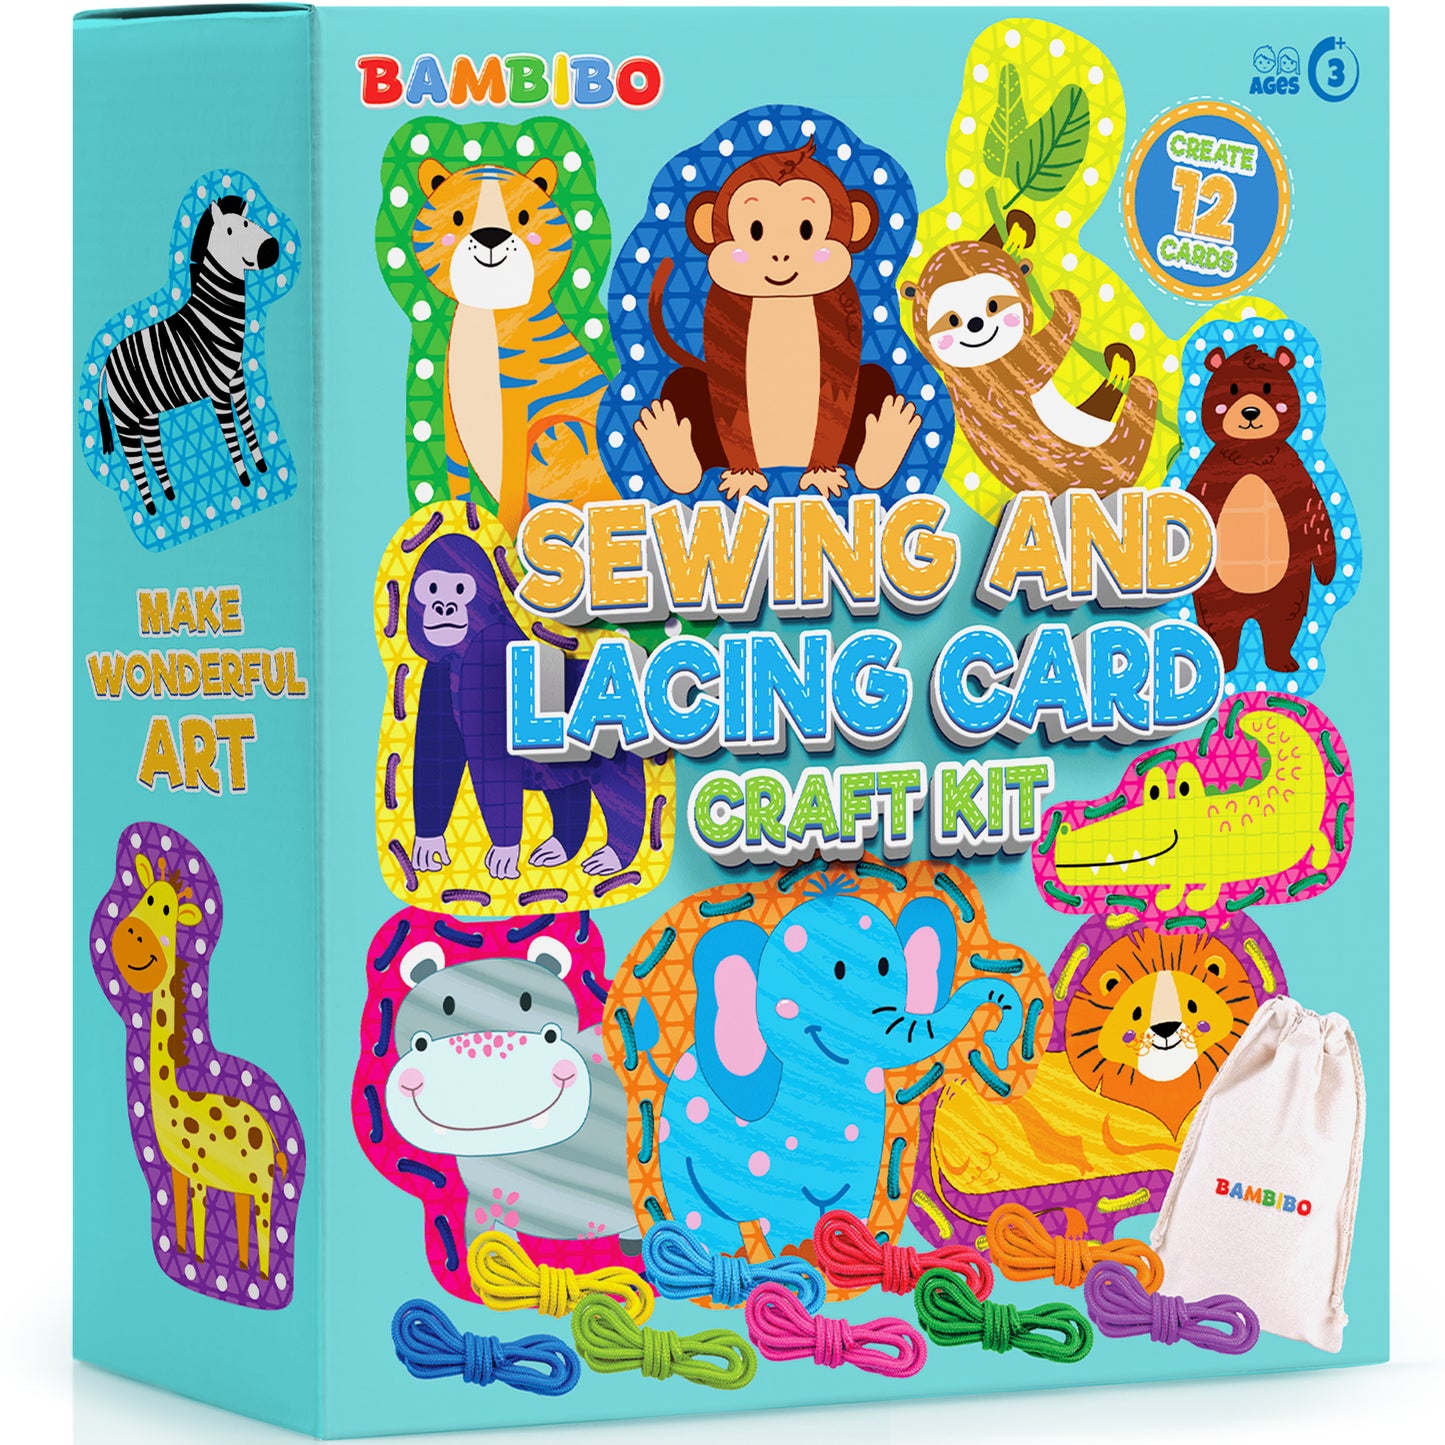 Bambibo Lacing Cards for Kids - Pack of 12 | Double Sided with Names and Features | Animal, Sewing Cards for Children | 12 Colorful Threading Toys for Toddlers | DIY Fine Motor Skills Ages - 3 4 5 6